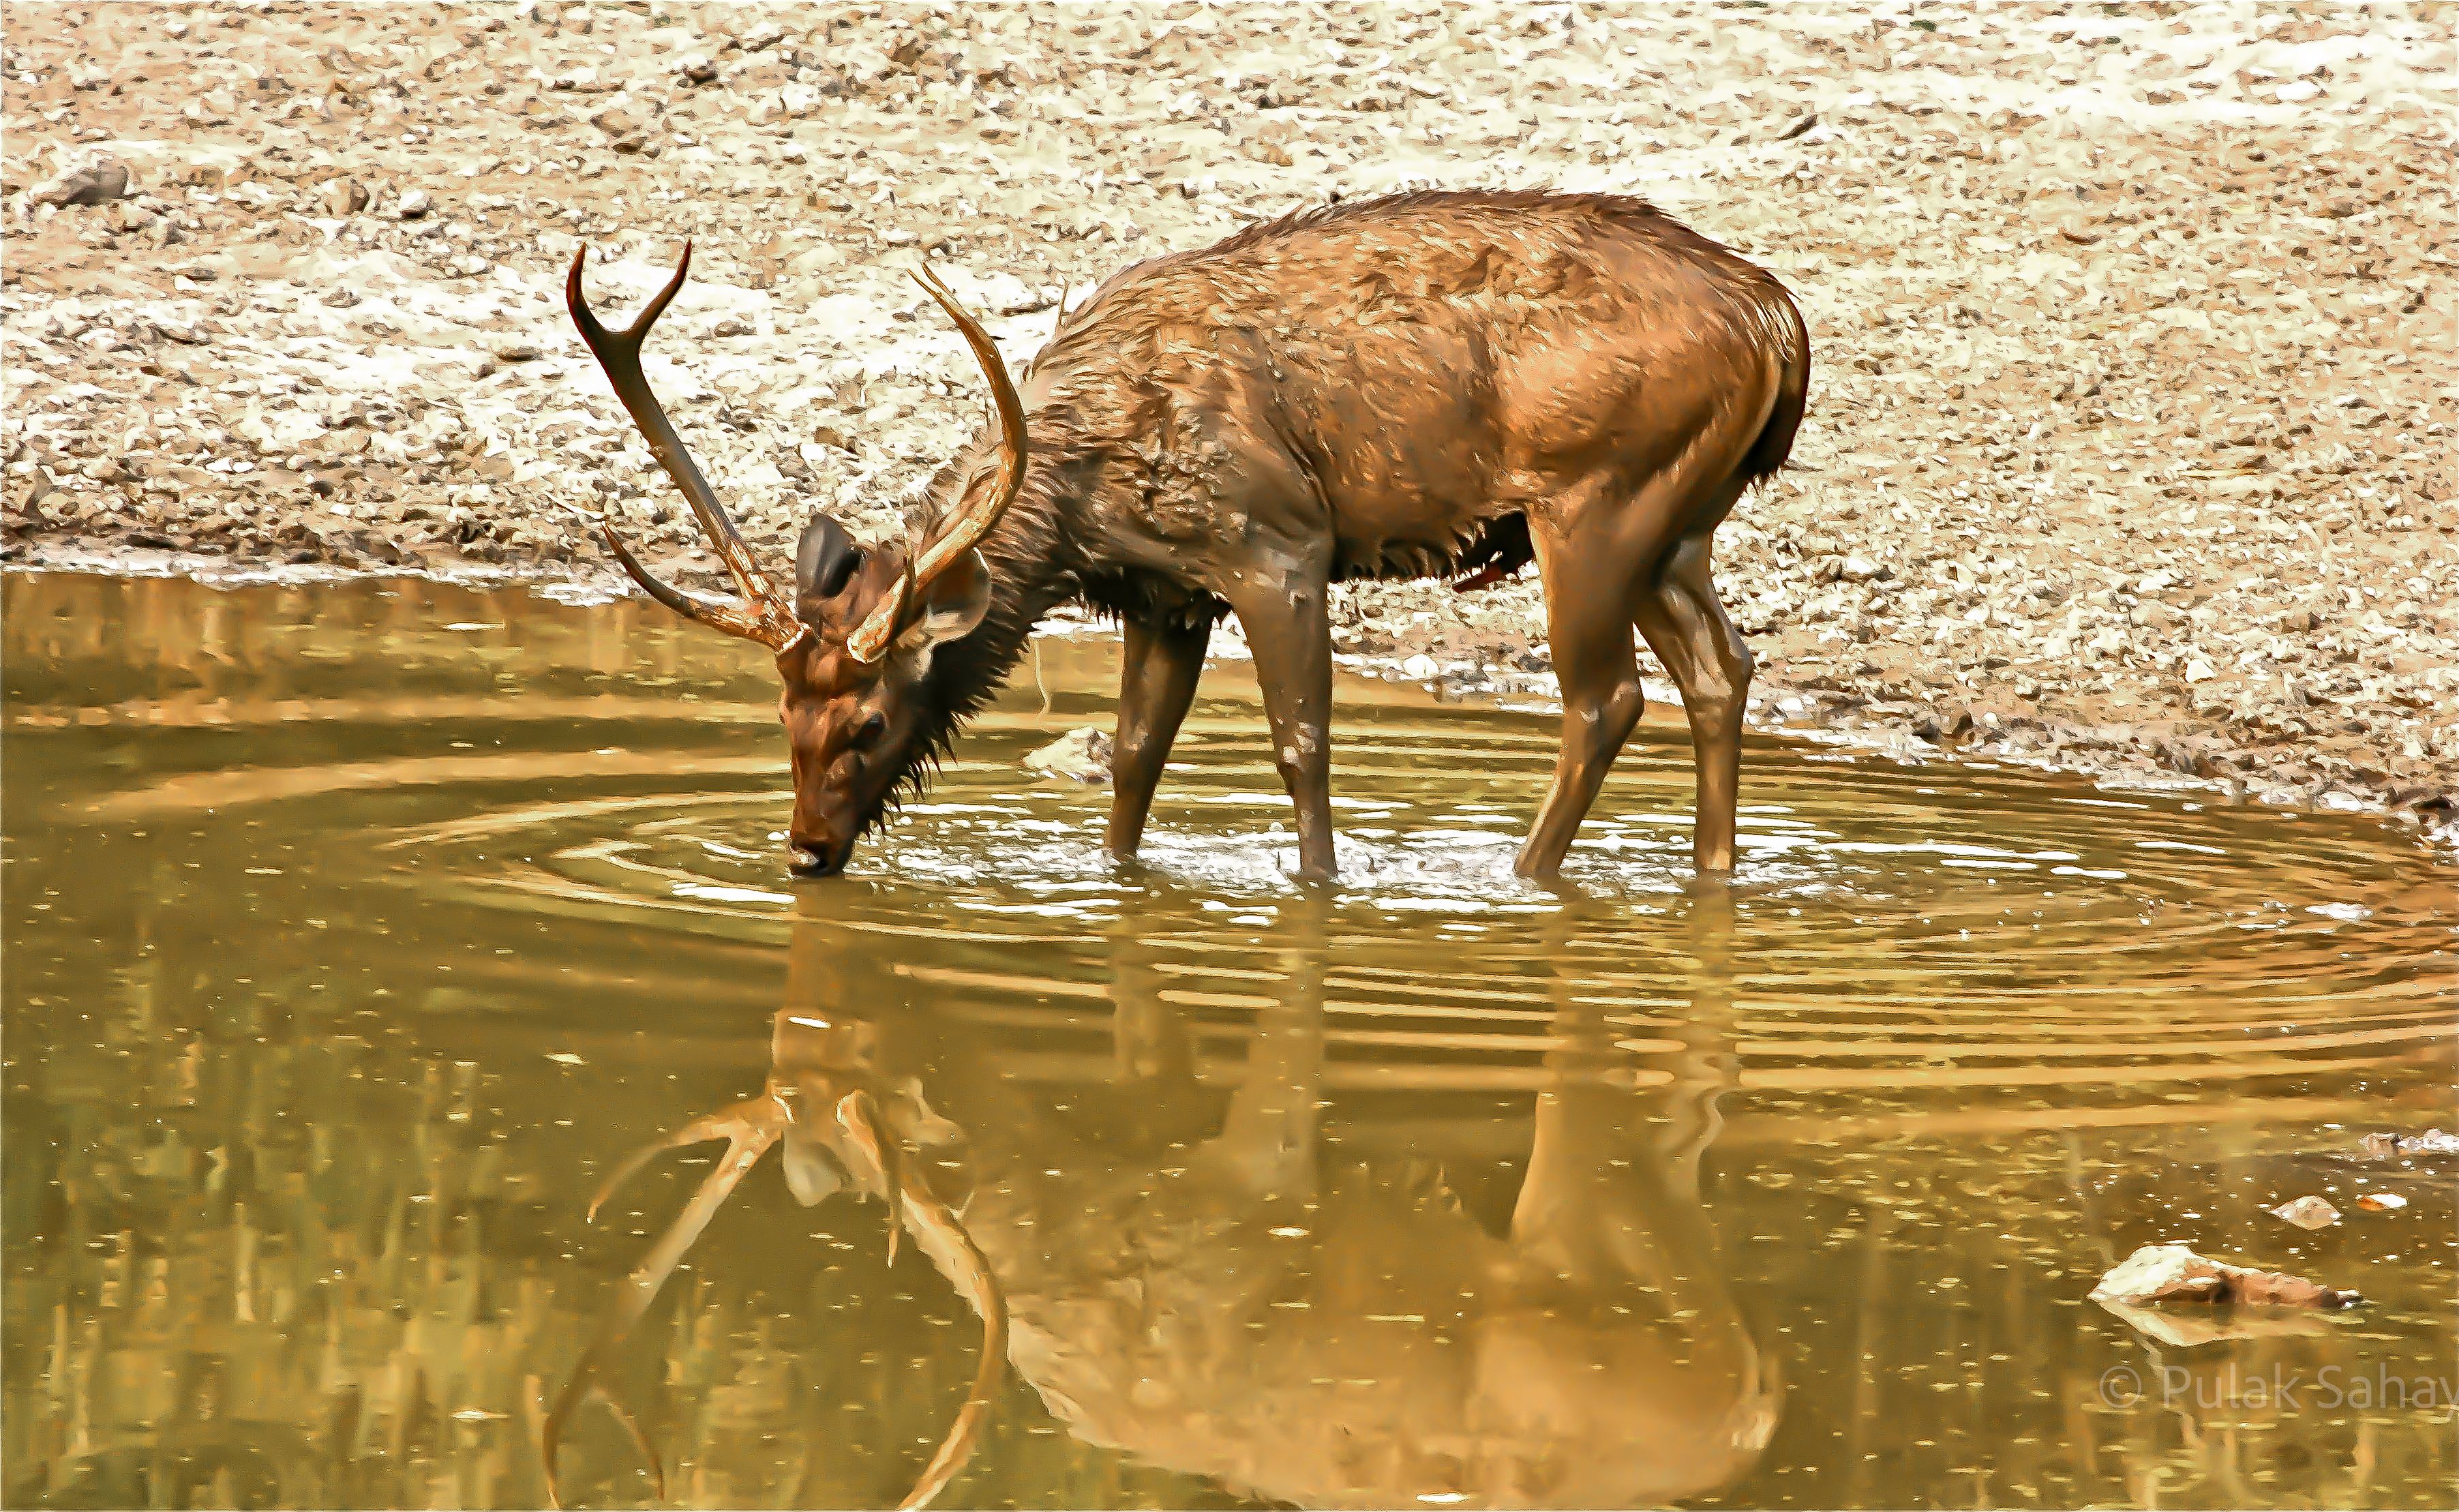 Reflection of a deer drinking in a pool